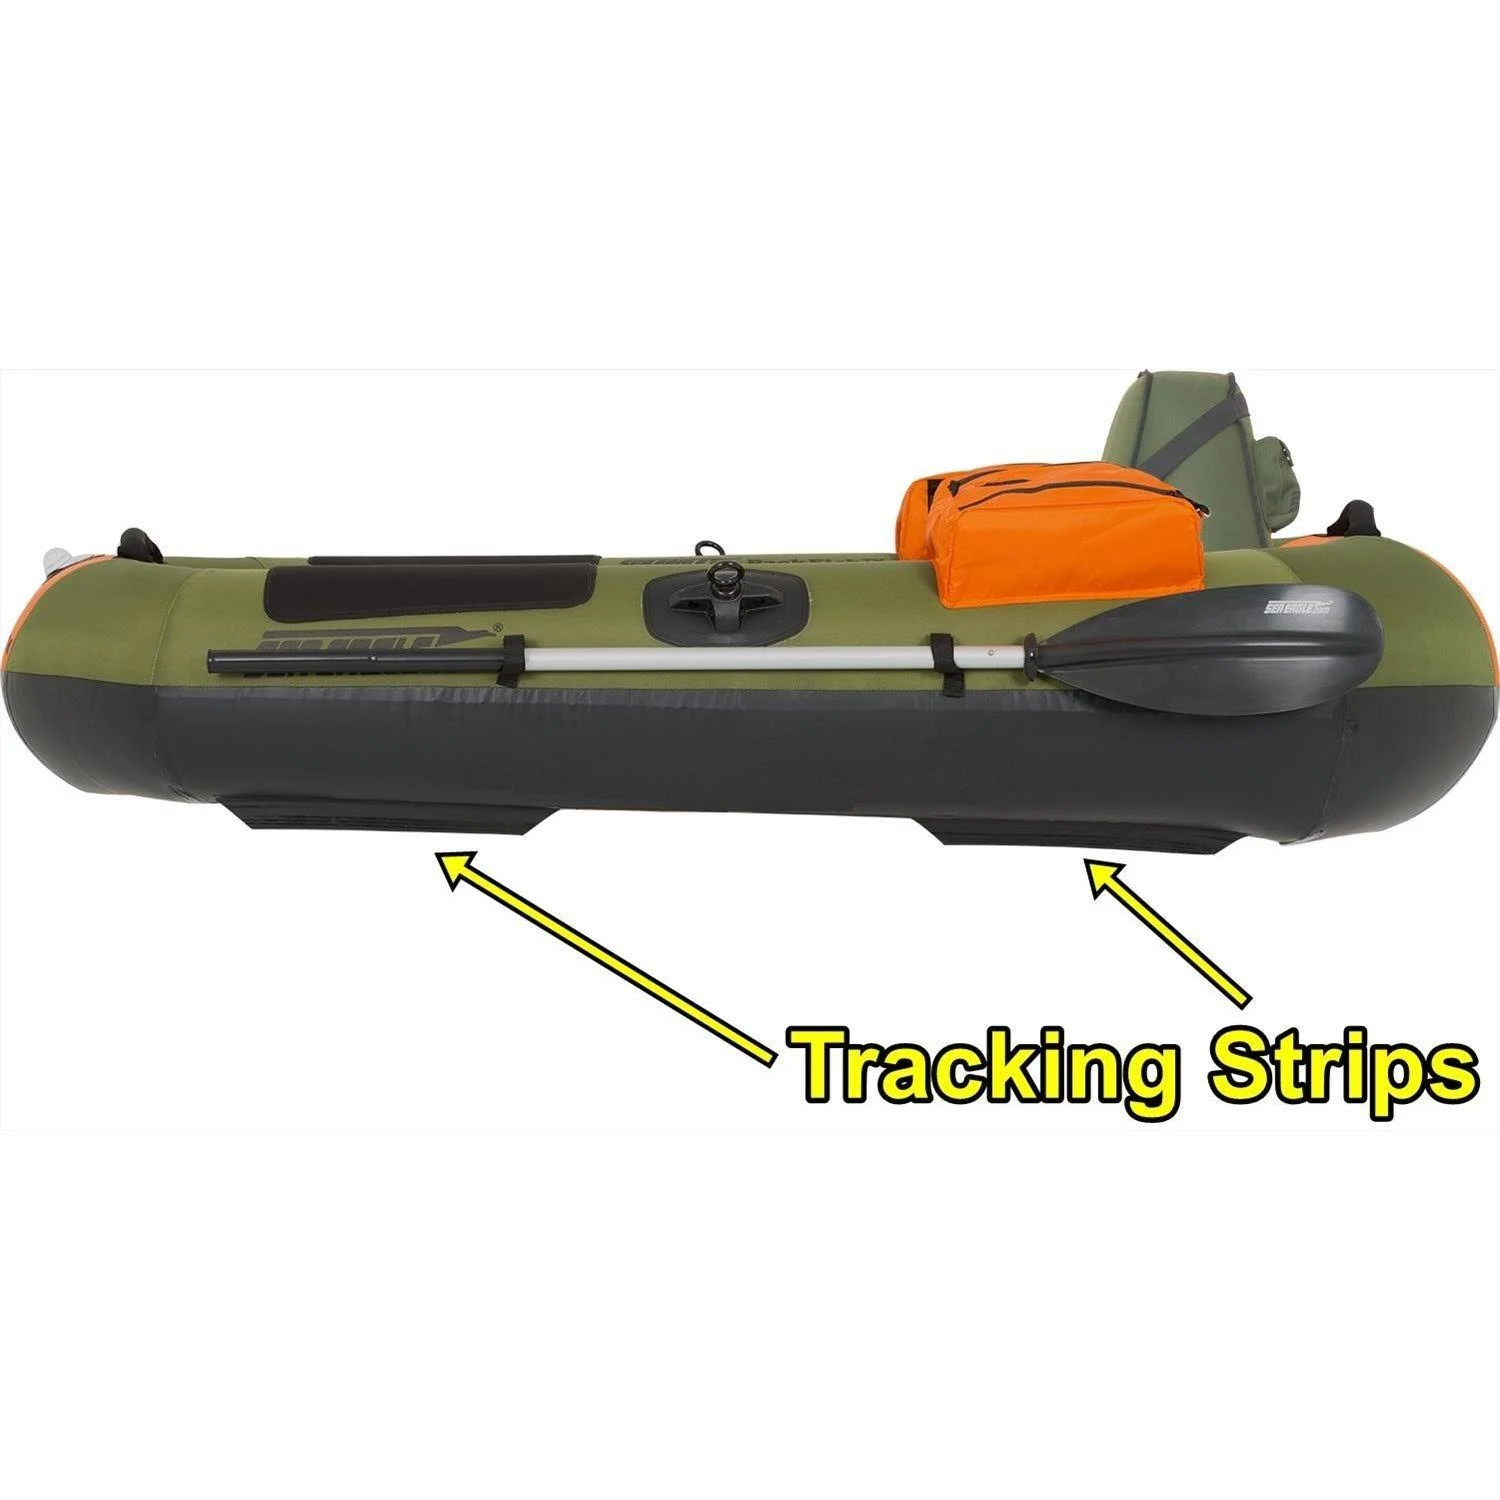 Sea Eagle PackFish7 Inflatable Fishing Boat Deluxe